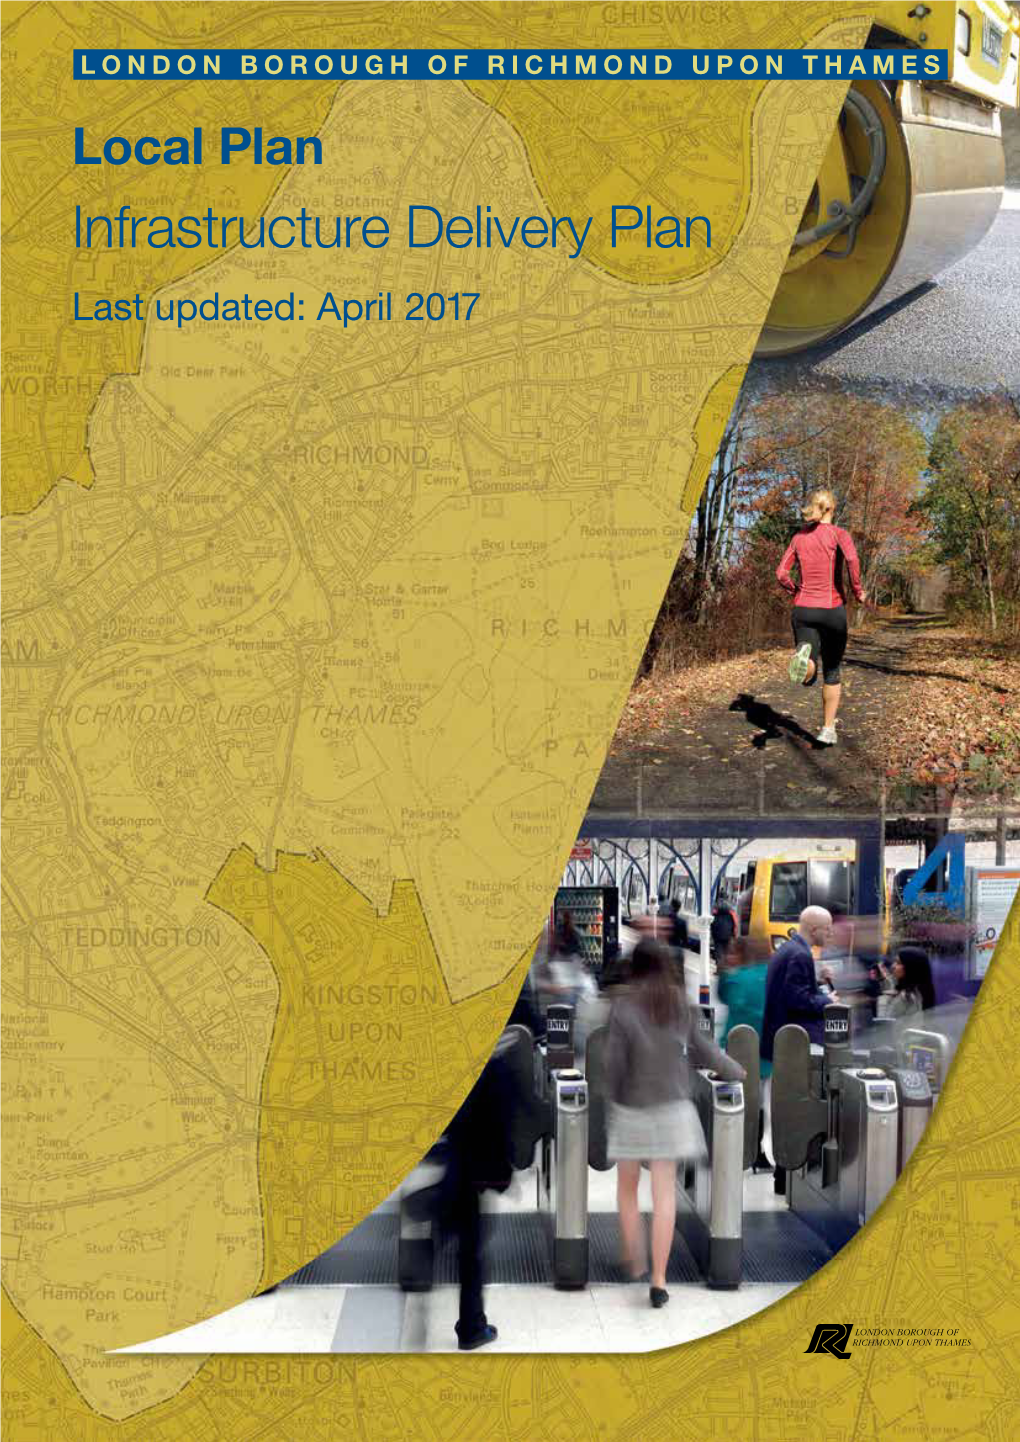 Infrastructure Delivery Plan (2017)